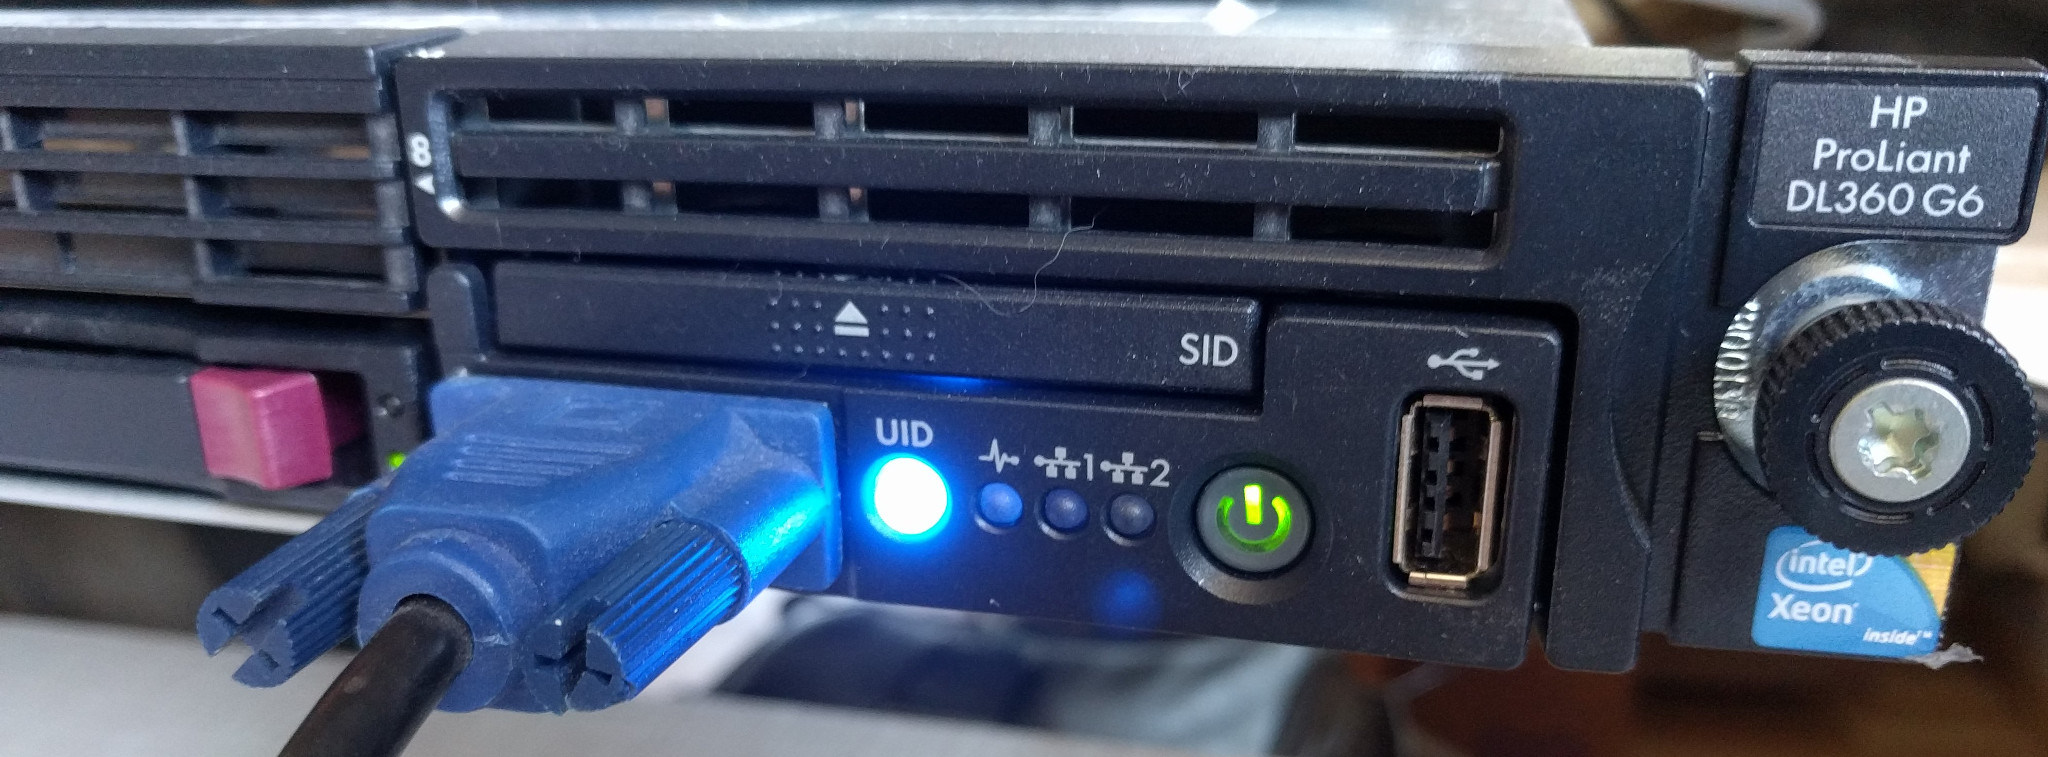 can a hp dl360 g6 use 4r memory